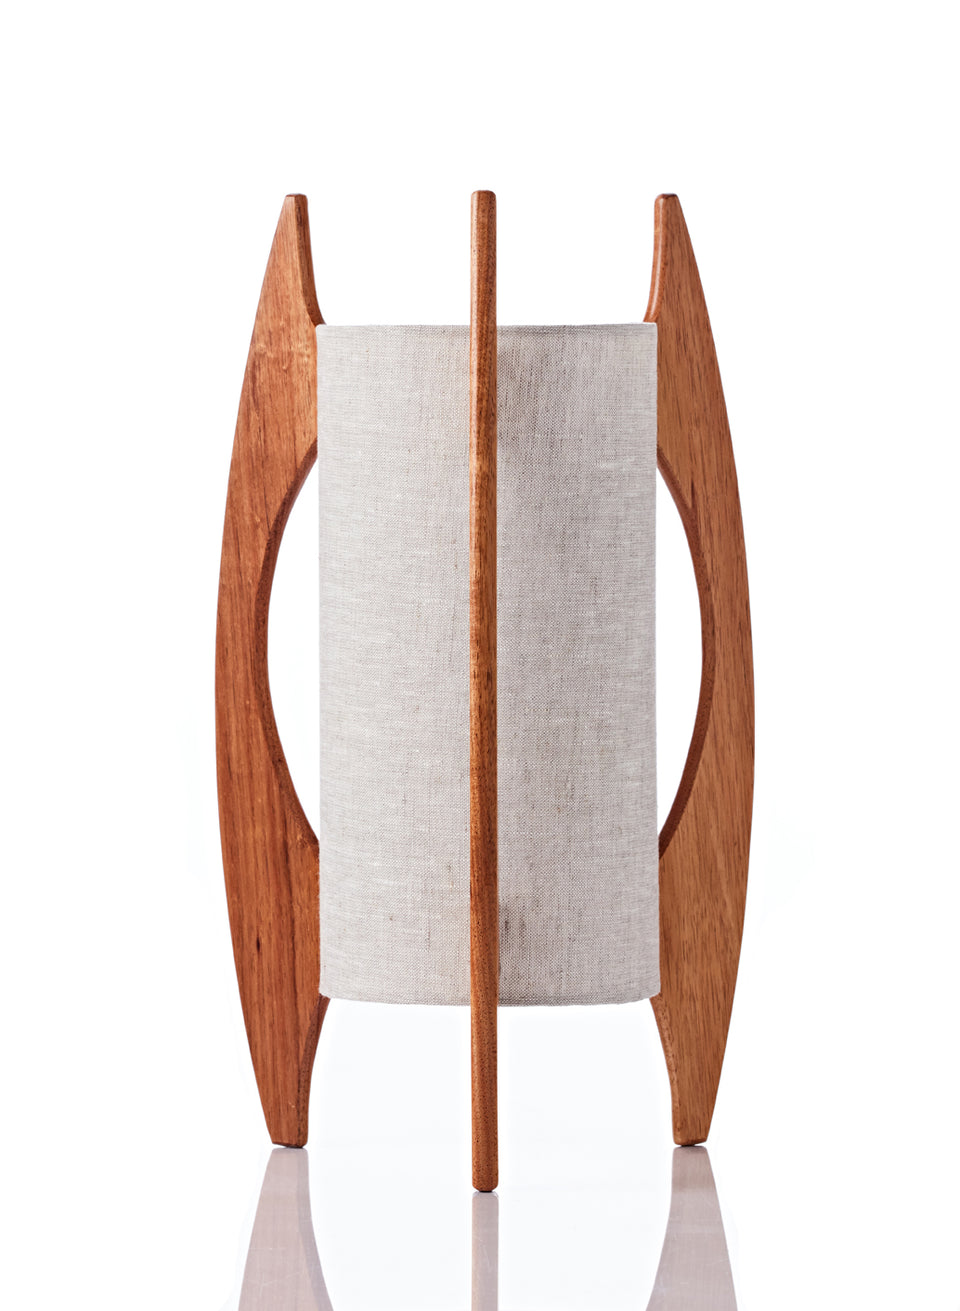 Rocket Table Lamp • Curved - Natural Linen